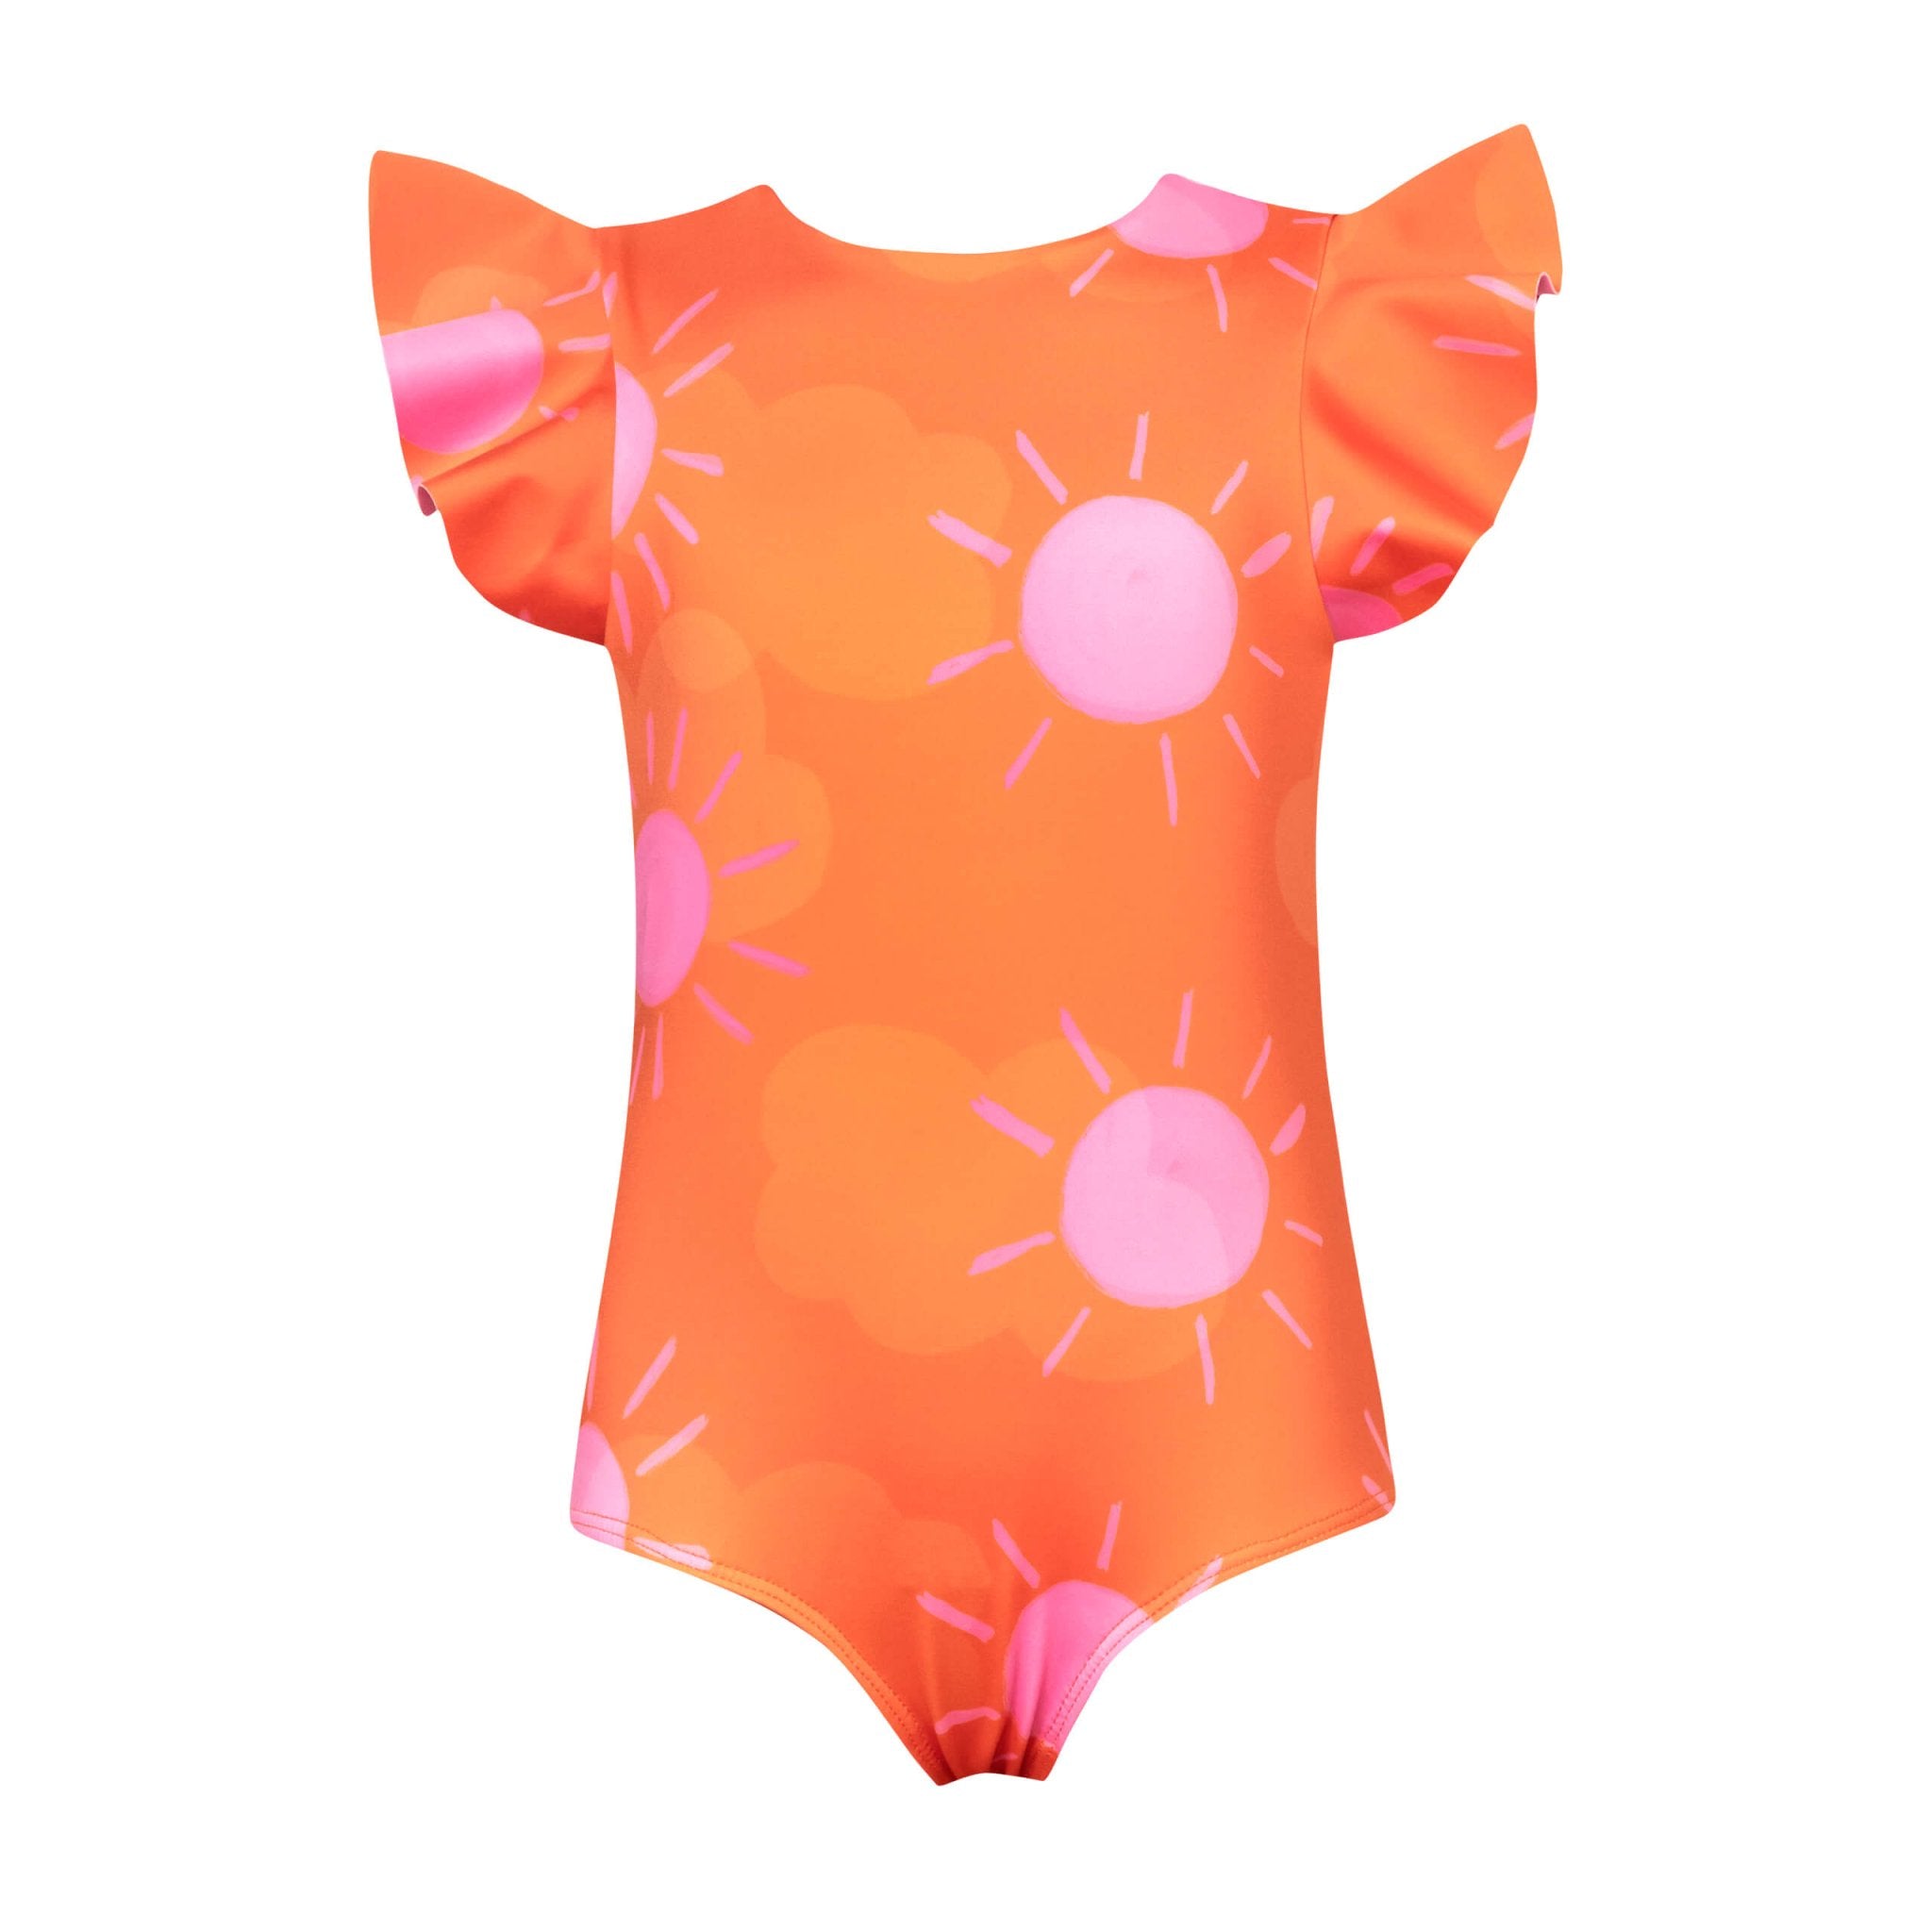 A orange one piece bikini for girls with a pink sun pattern and wavey sleeve. The swimsuit is shown over a white background.